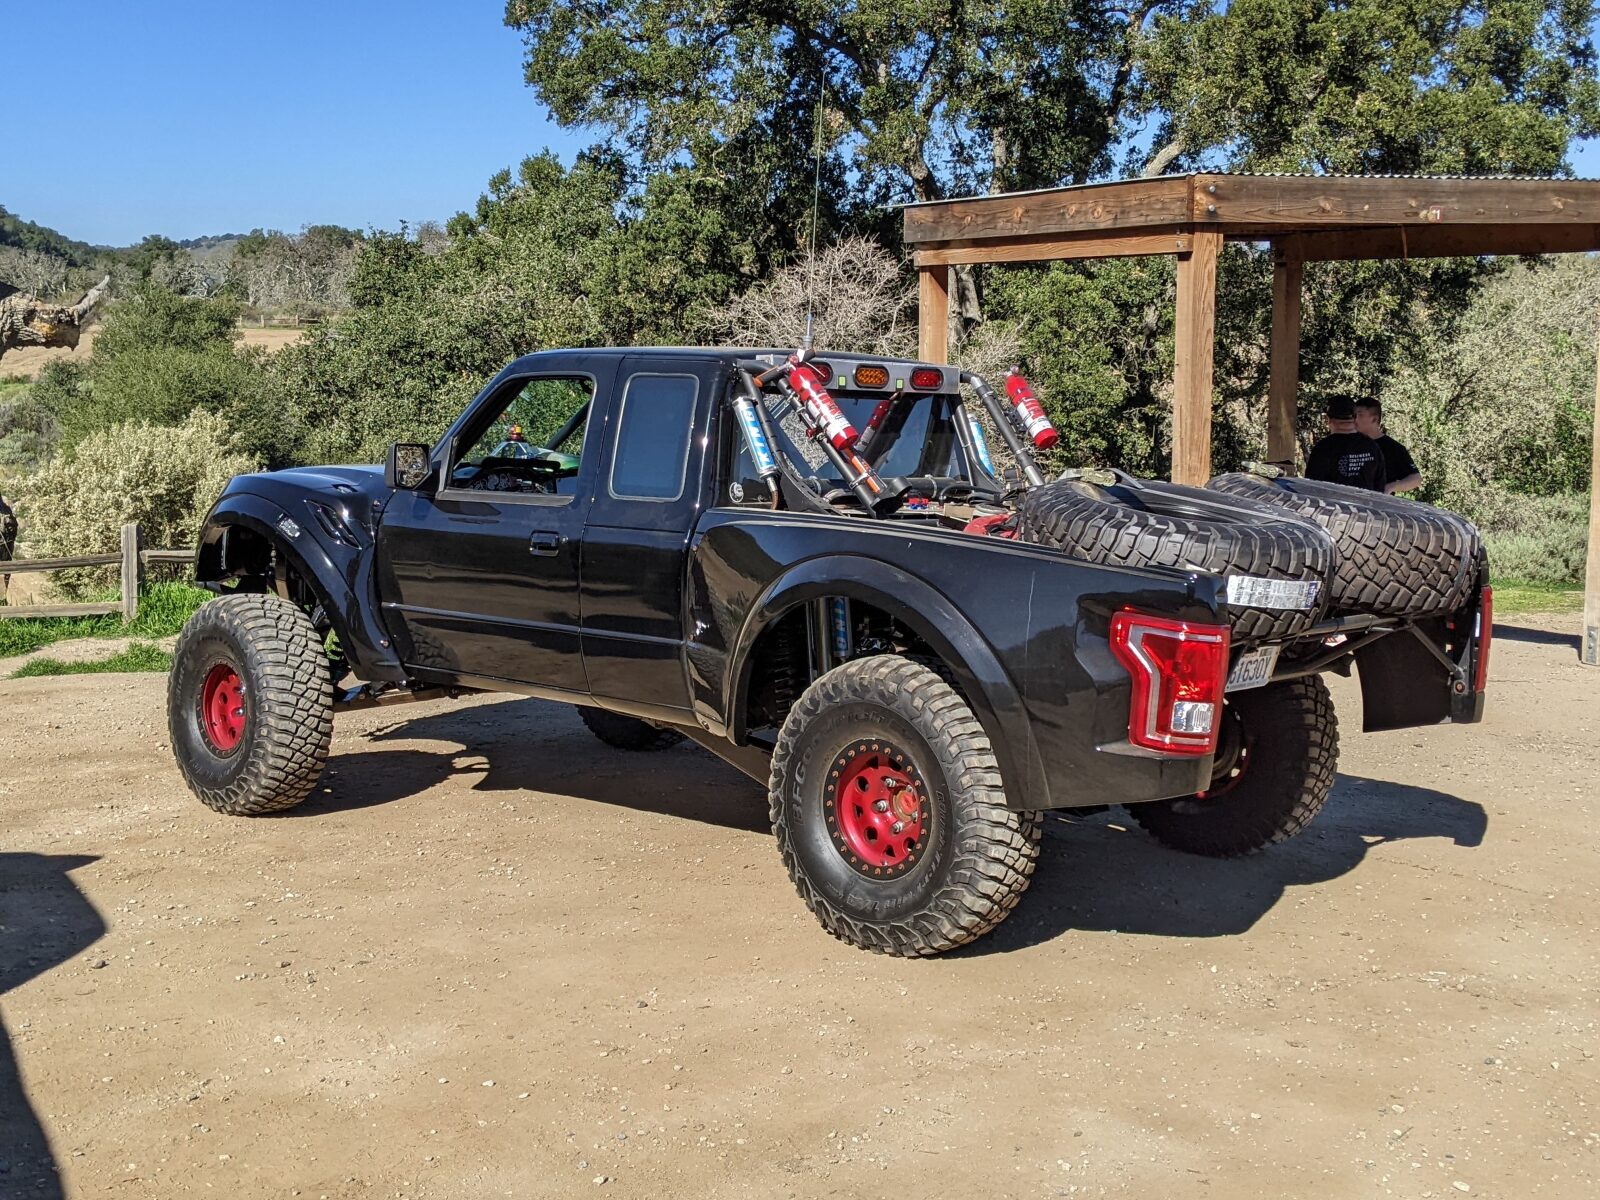 For Sale: SCORE-tagged 4-Link Ford Prerunner - Professional Build, New Parts, Well Maintained, and Turnkey - photo2